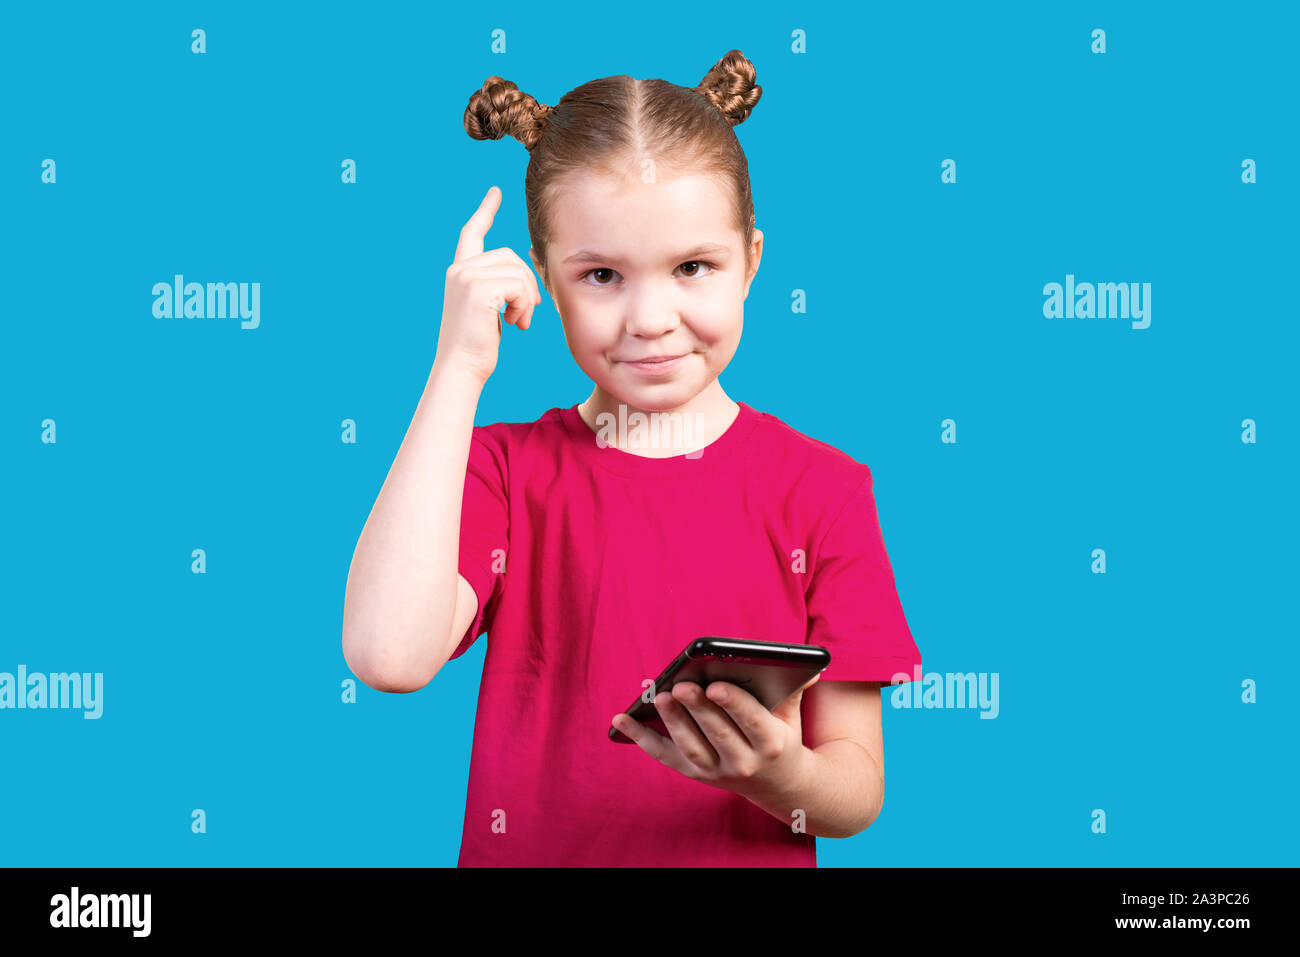 Little girl with a pensive facial expression uses a smartphone isolated on a blue background. Stock Photo